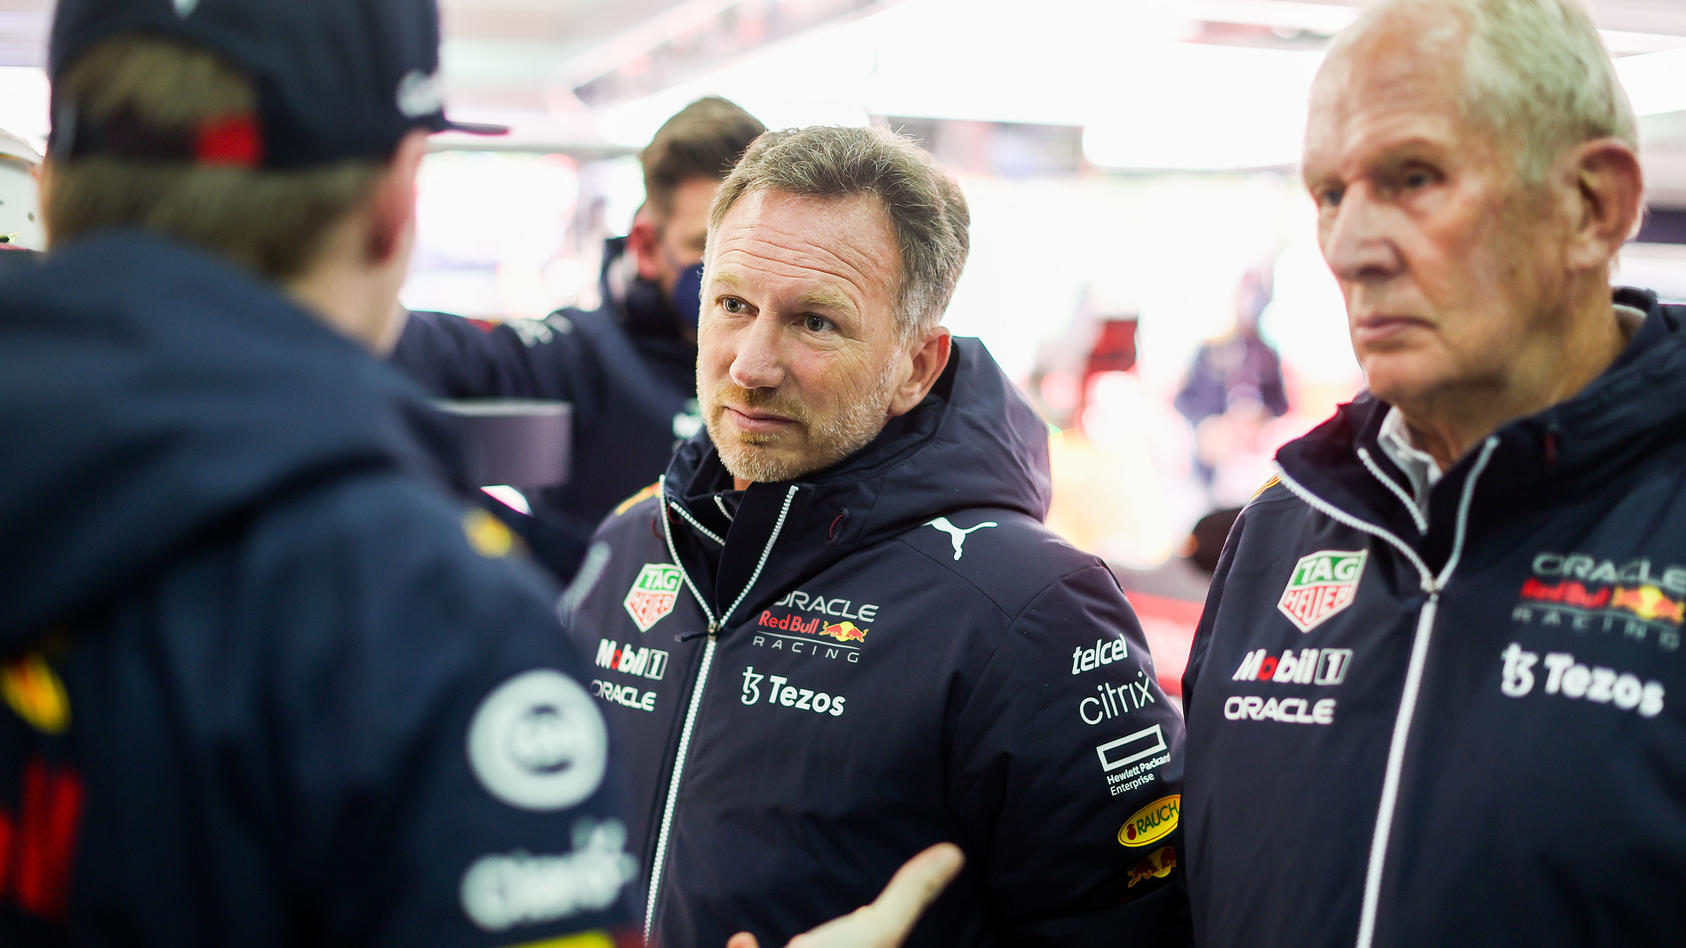 IMOLA, ITALY - APRIL 22: Christian Horner of Great Britain and Red Bull Racing and Helmut Marko of Red Bull Racing and Austria chat with Max Verstappen of Red Bull Racing and The Netherlands  during practice/ ahead of the F1 Grand Prix of Emilia Roma